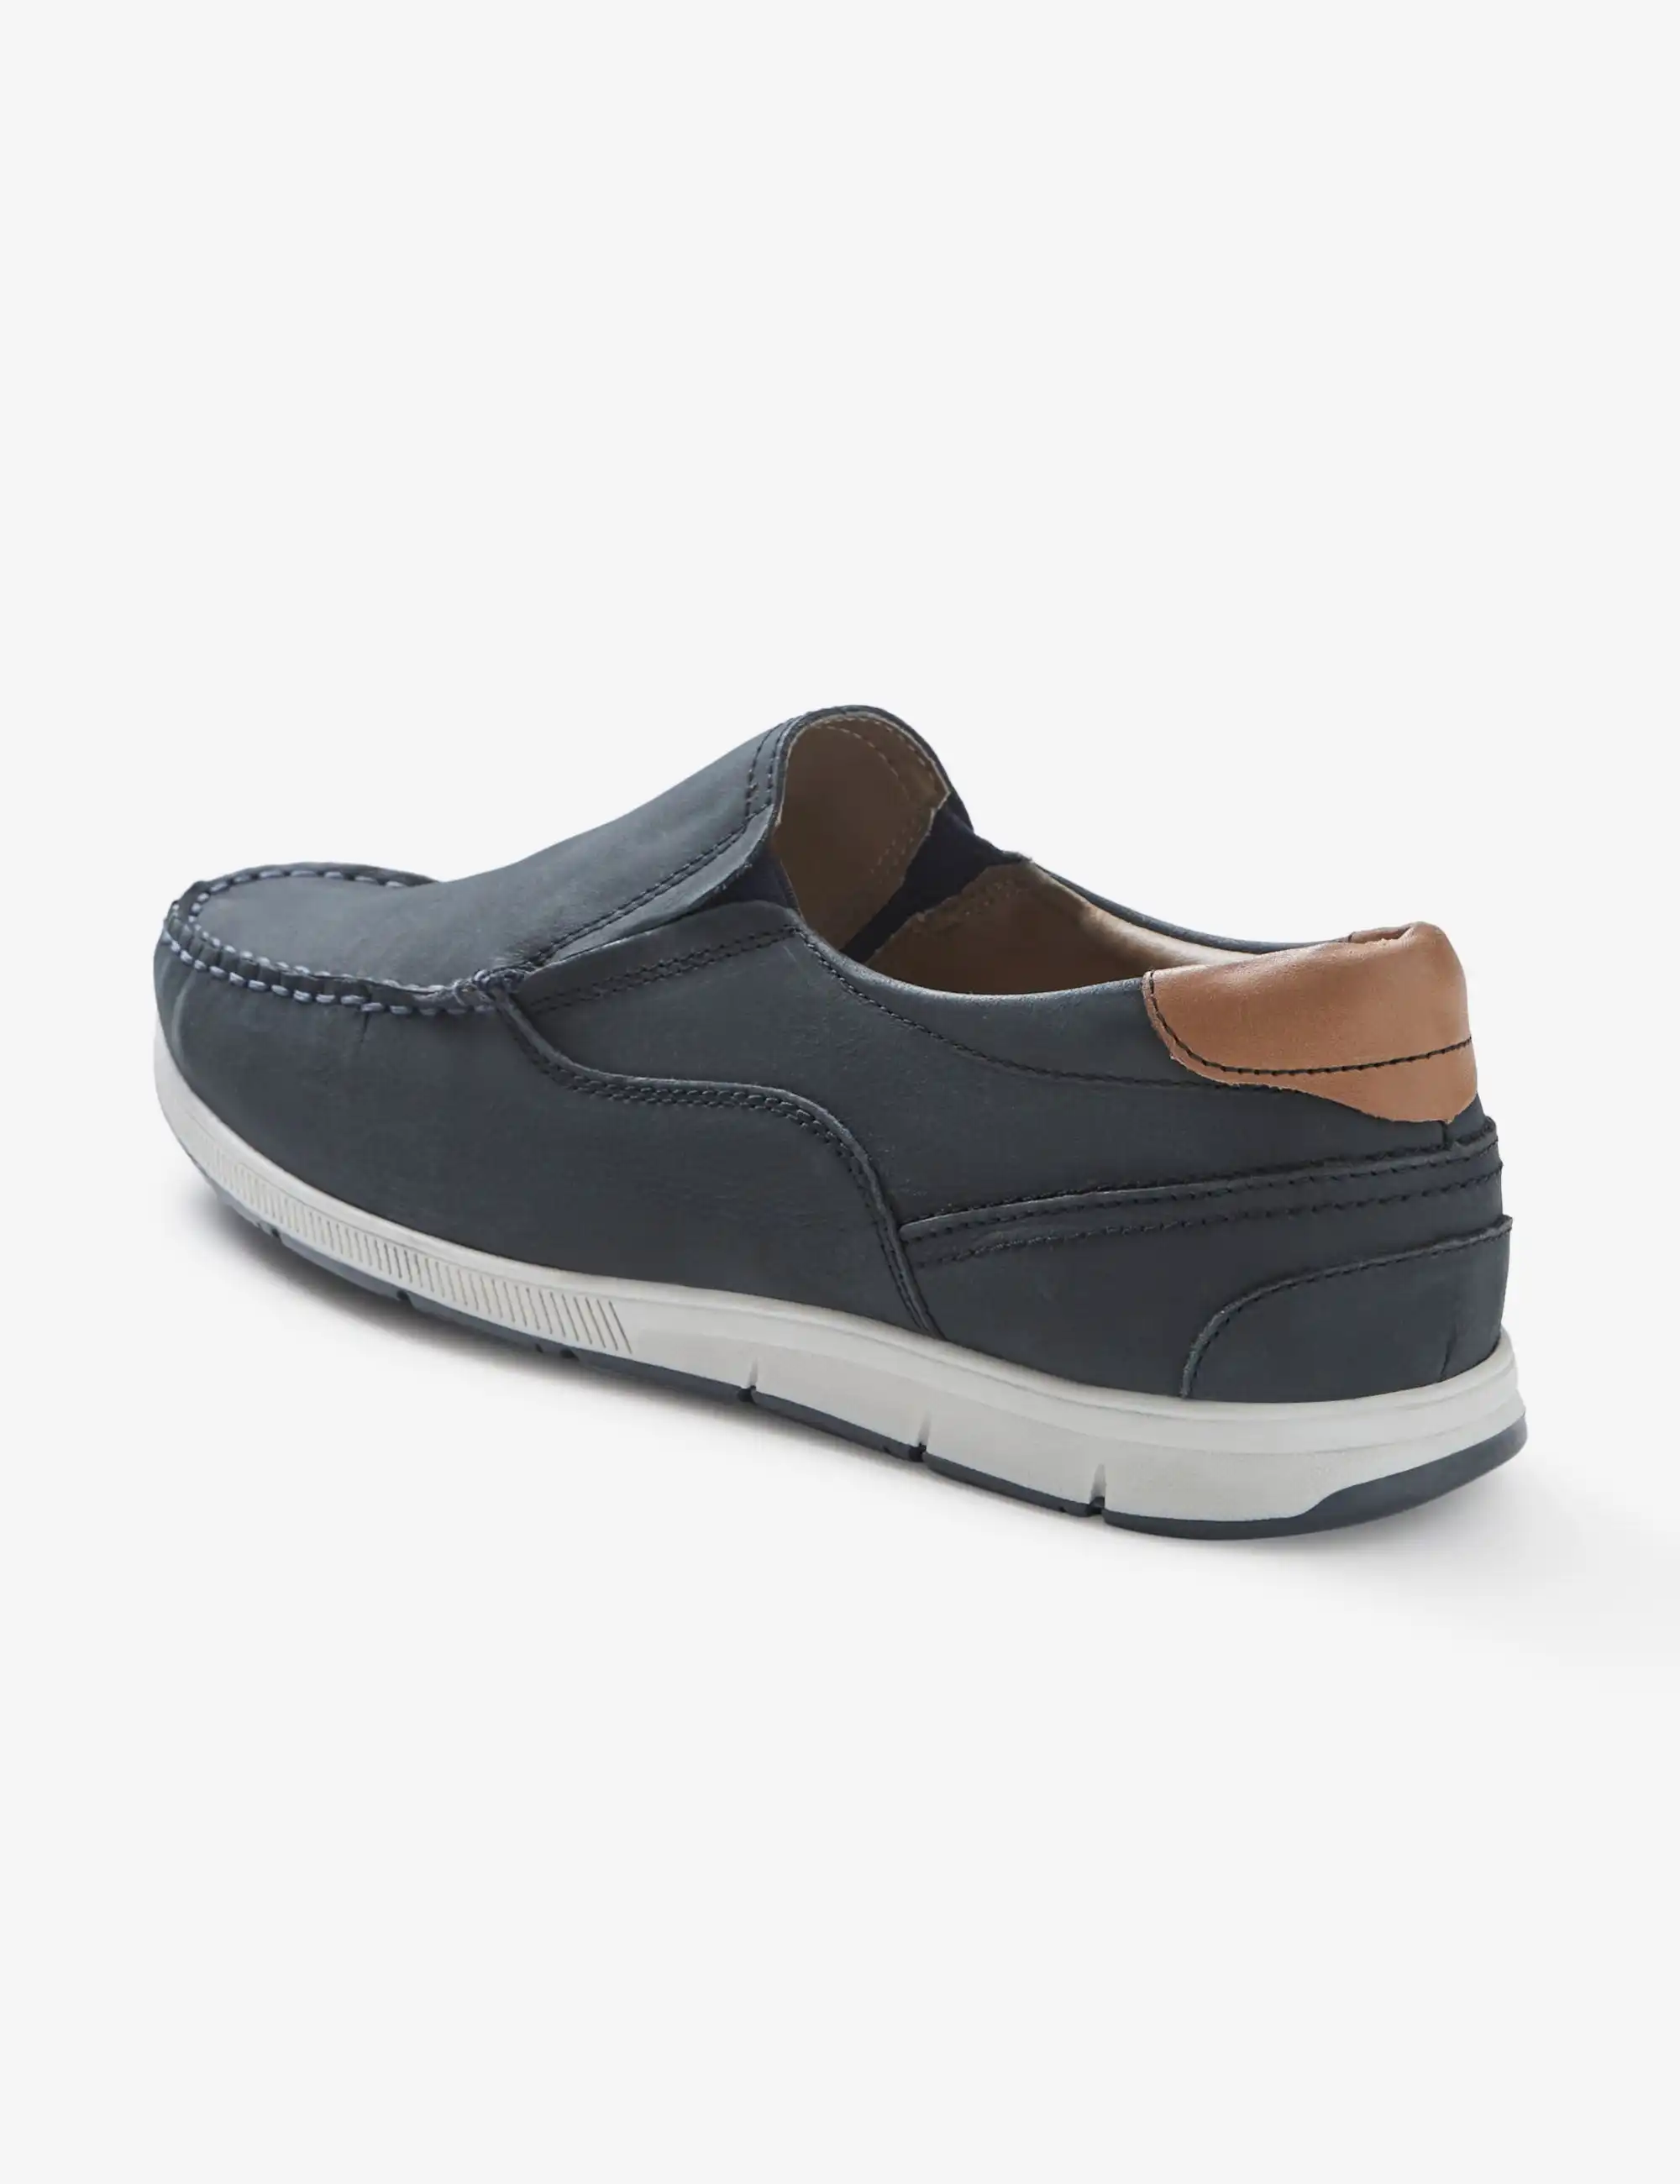 Rivers Slip On Leather Casual Shoe